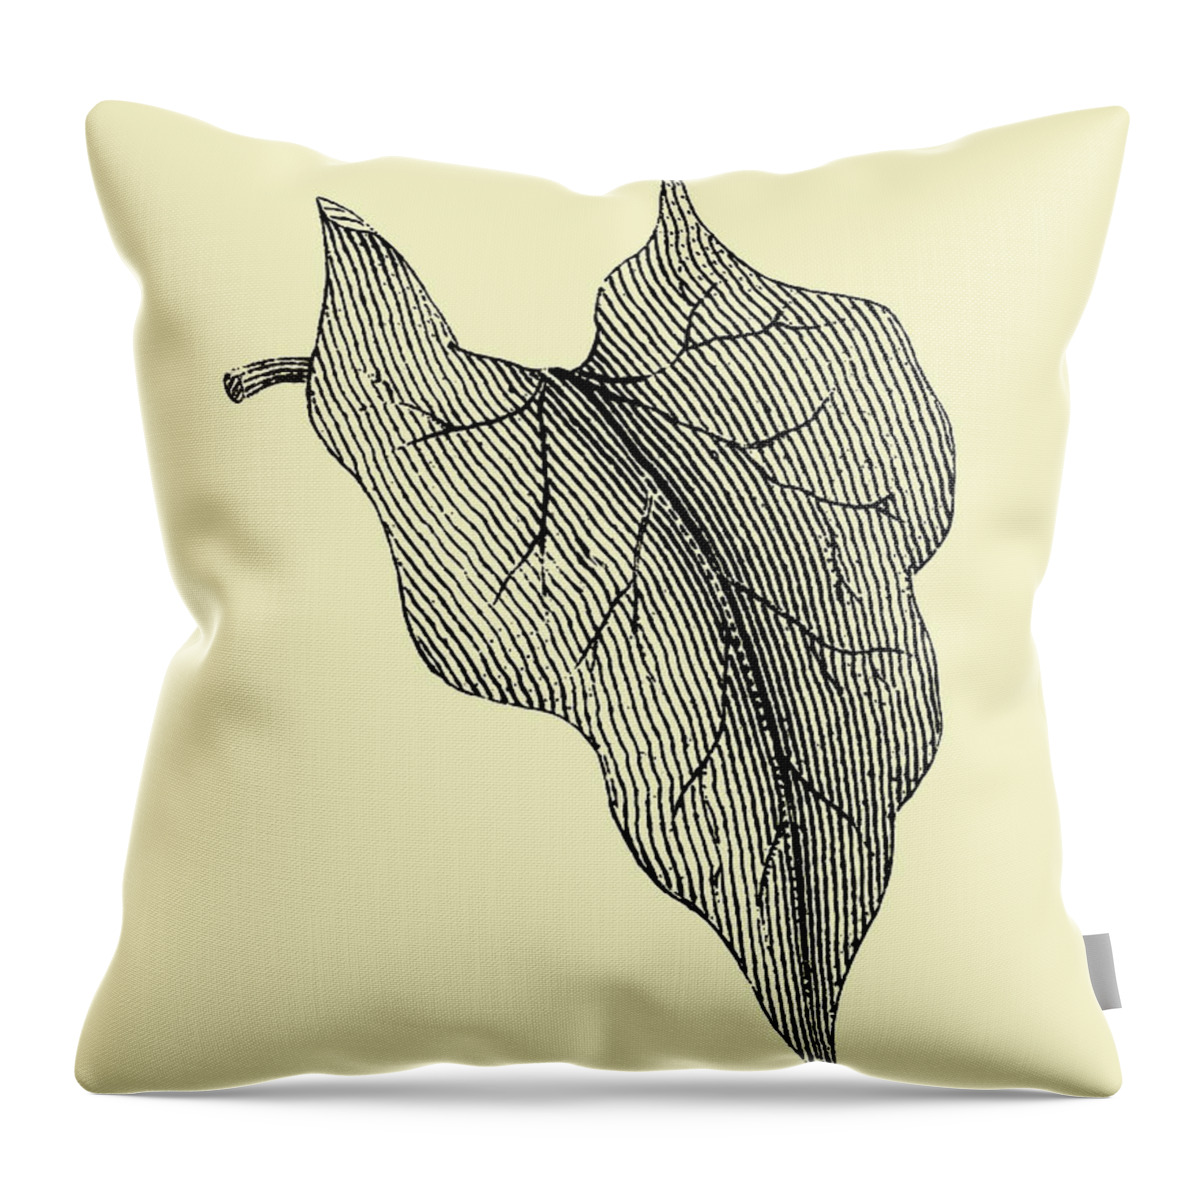 Leaf Throw Pillow featuring the mixed media Leaf 3 by Naxart Studio